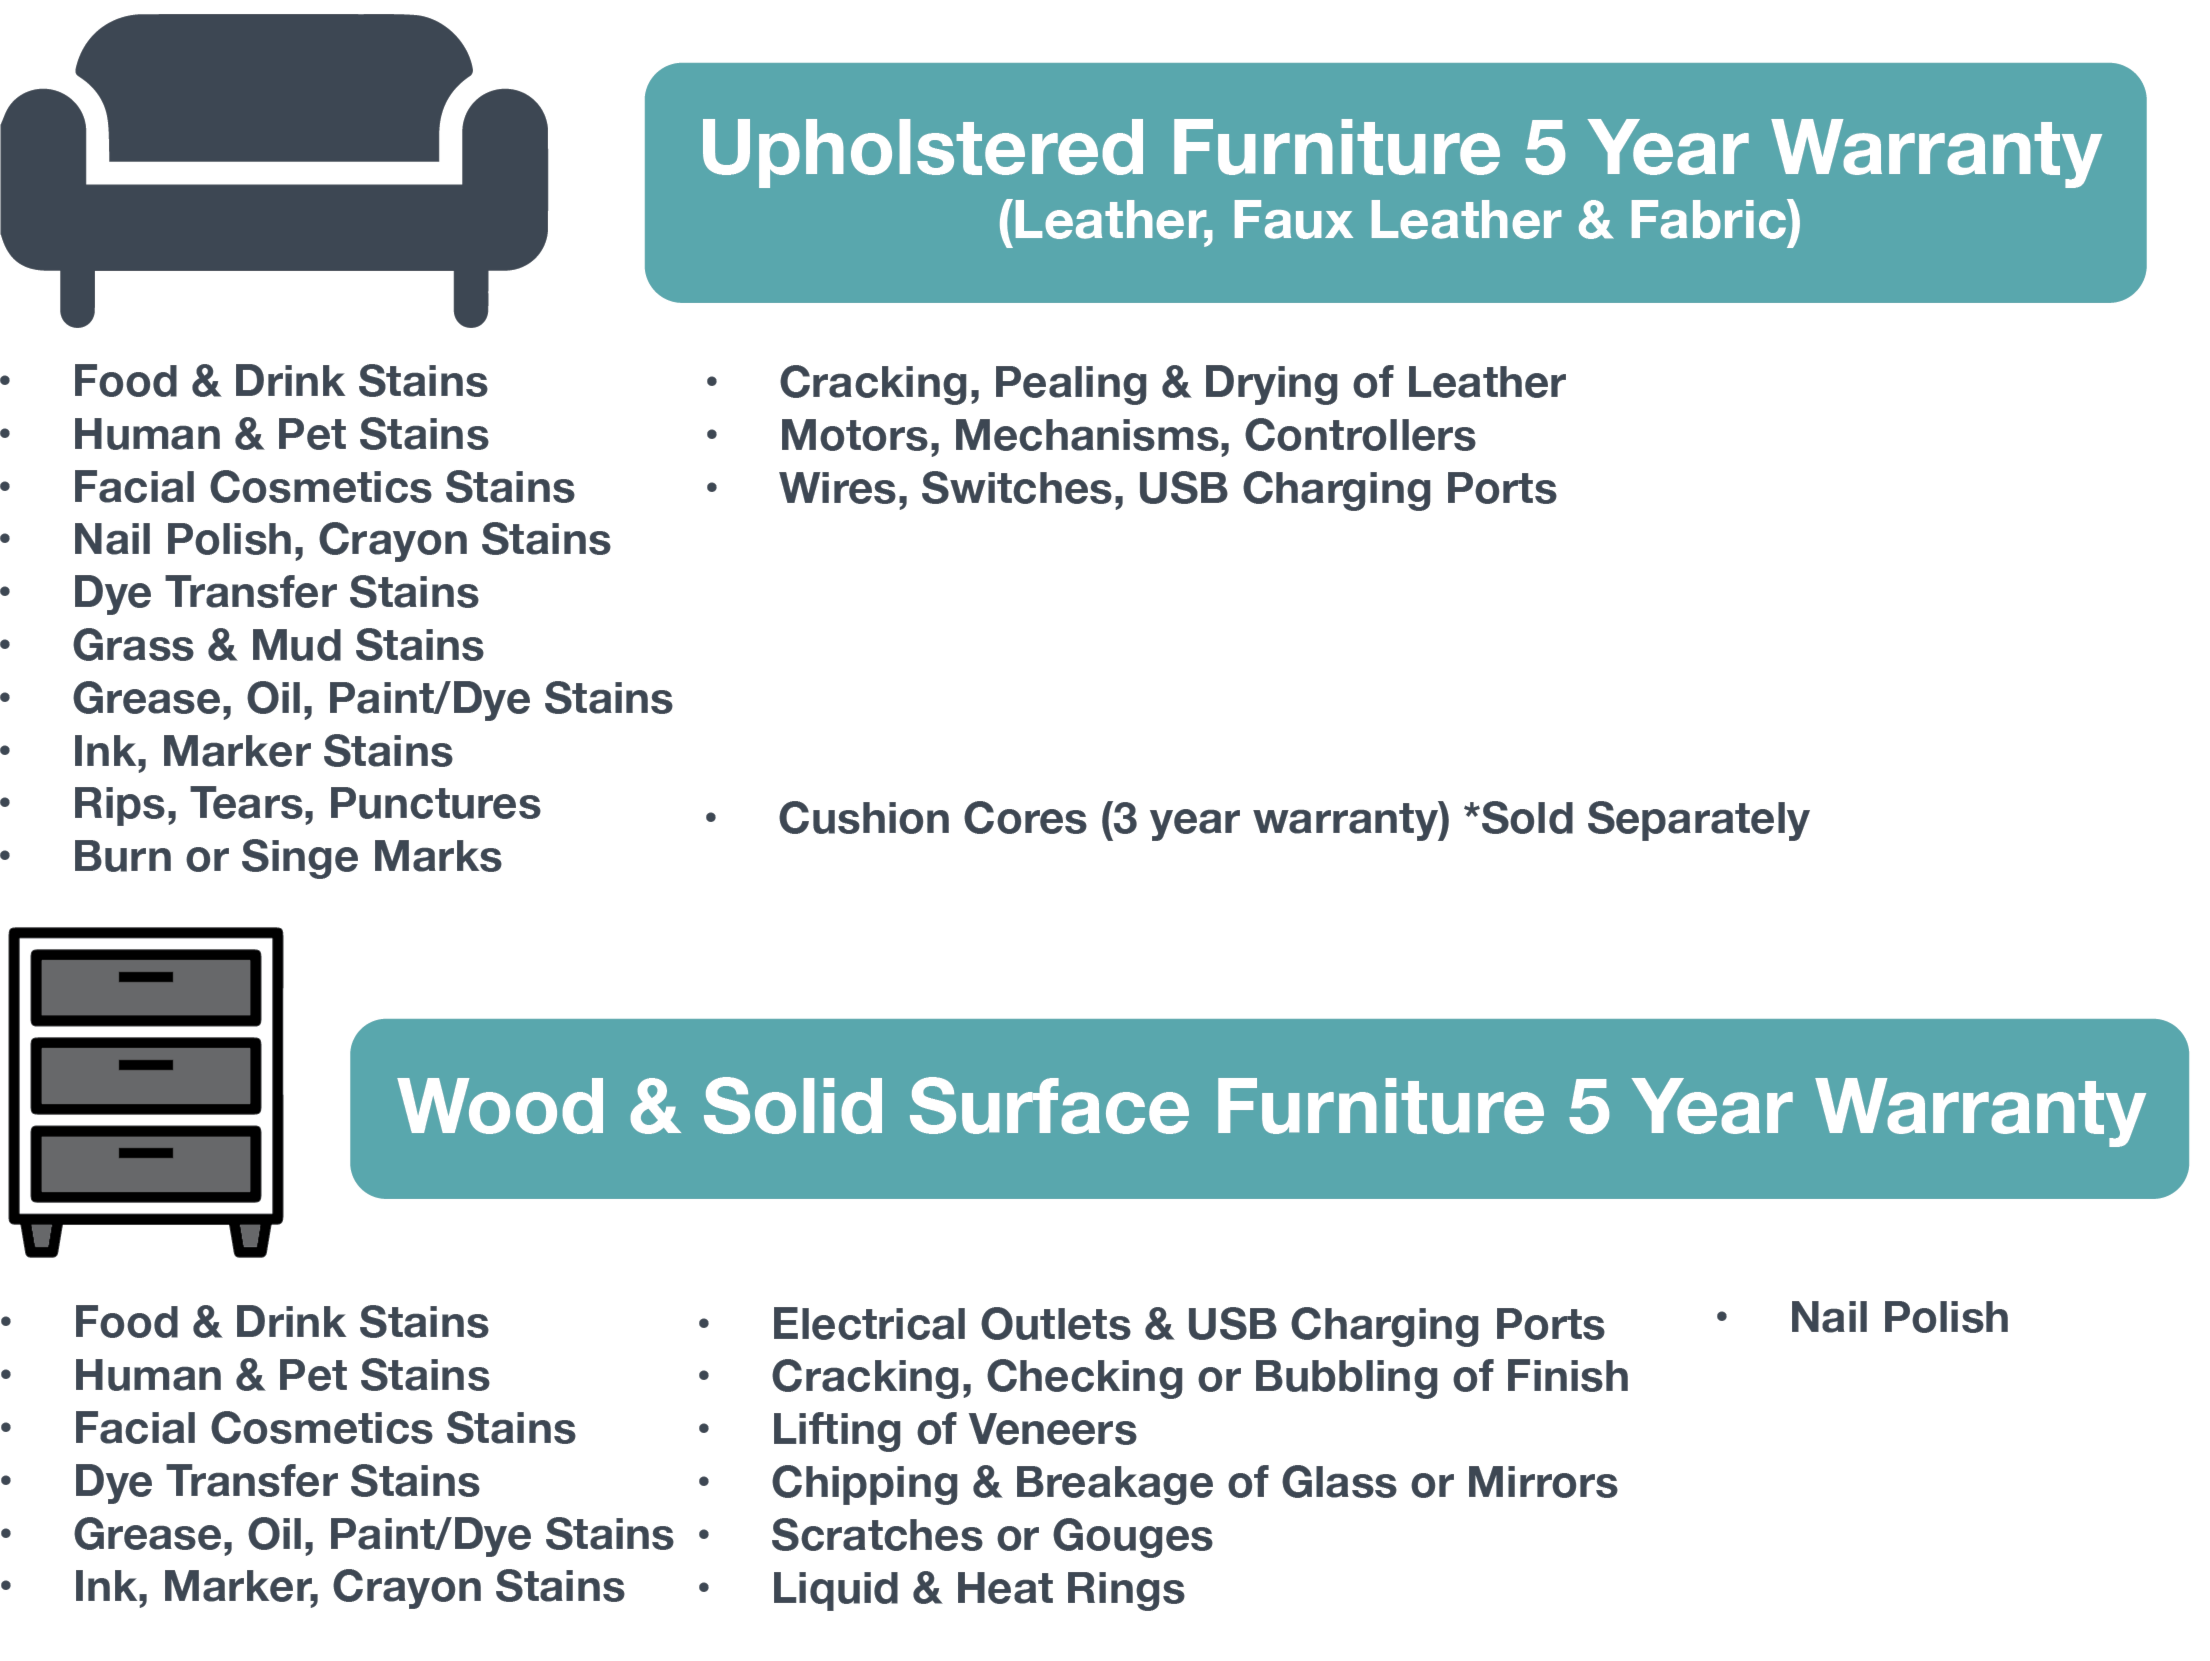 Upholstered Furniture and Wood & Solid Surface Furniture - Premium Plan